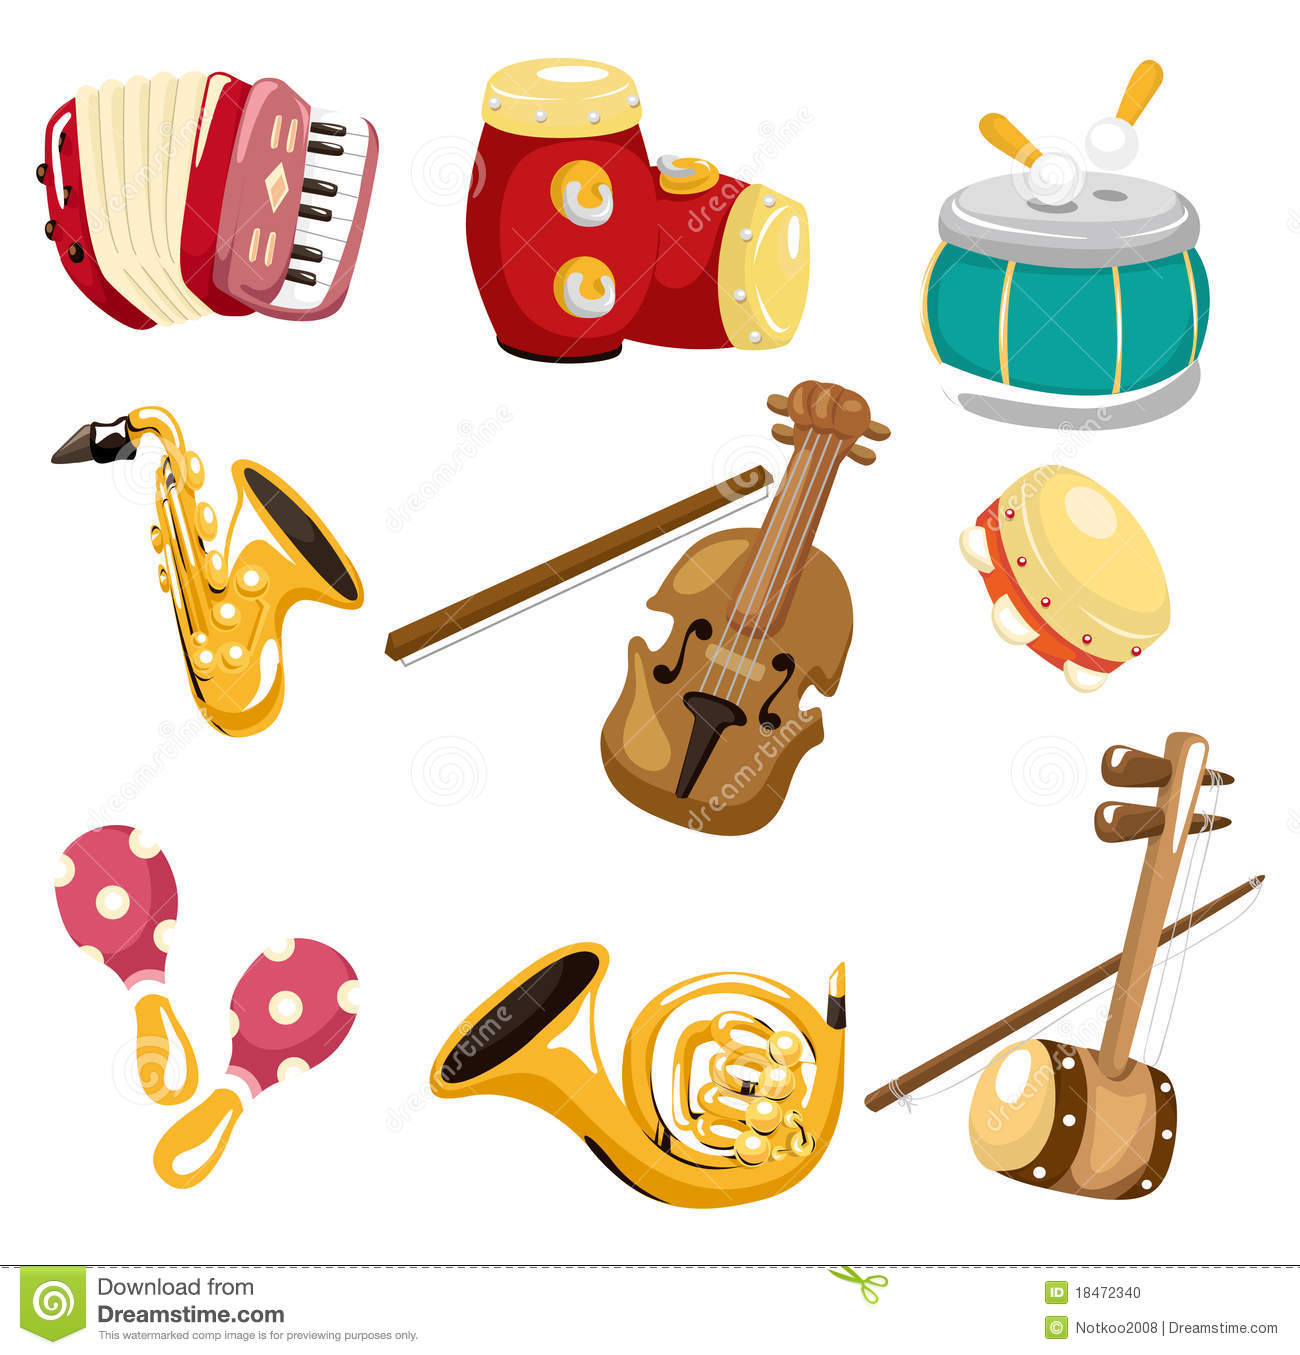 Self playing musical instruments clipart - Clipground